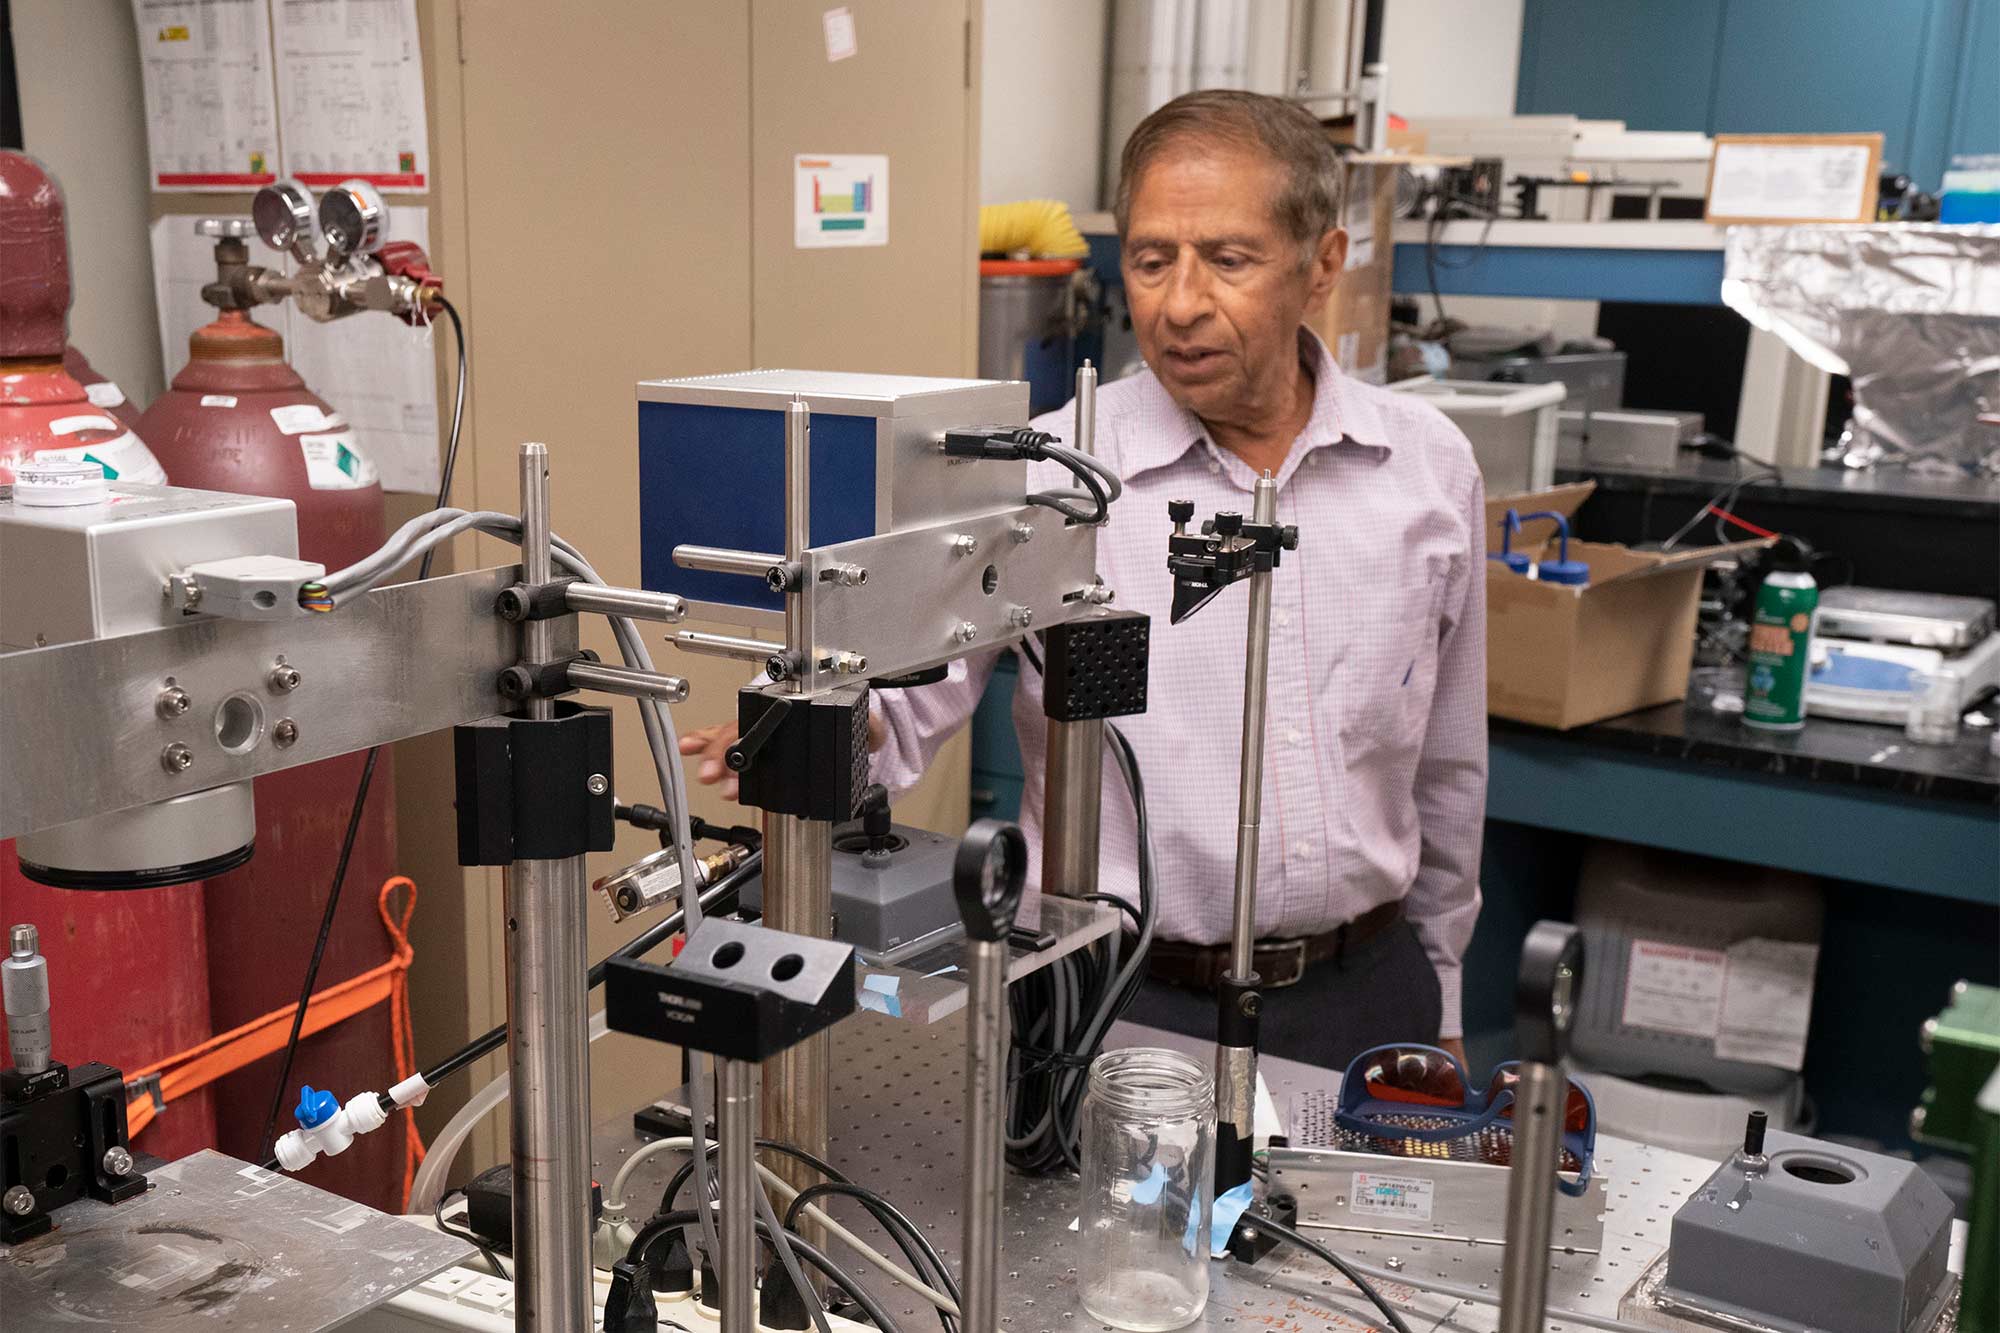 In an engineering lab, Gupta examines a stainless steel machine on a workbench